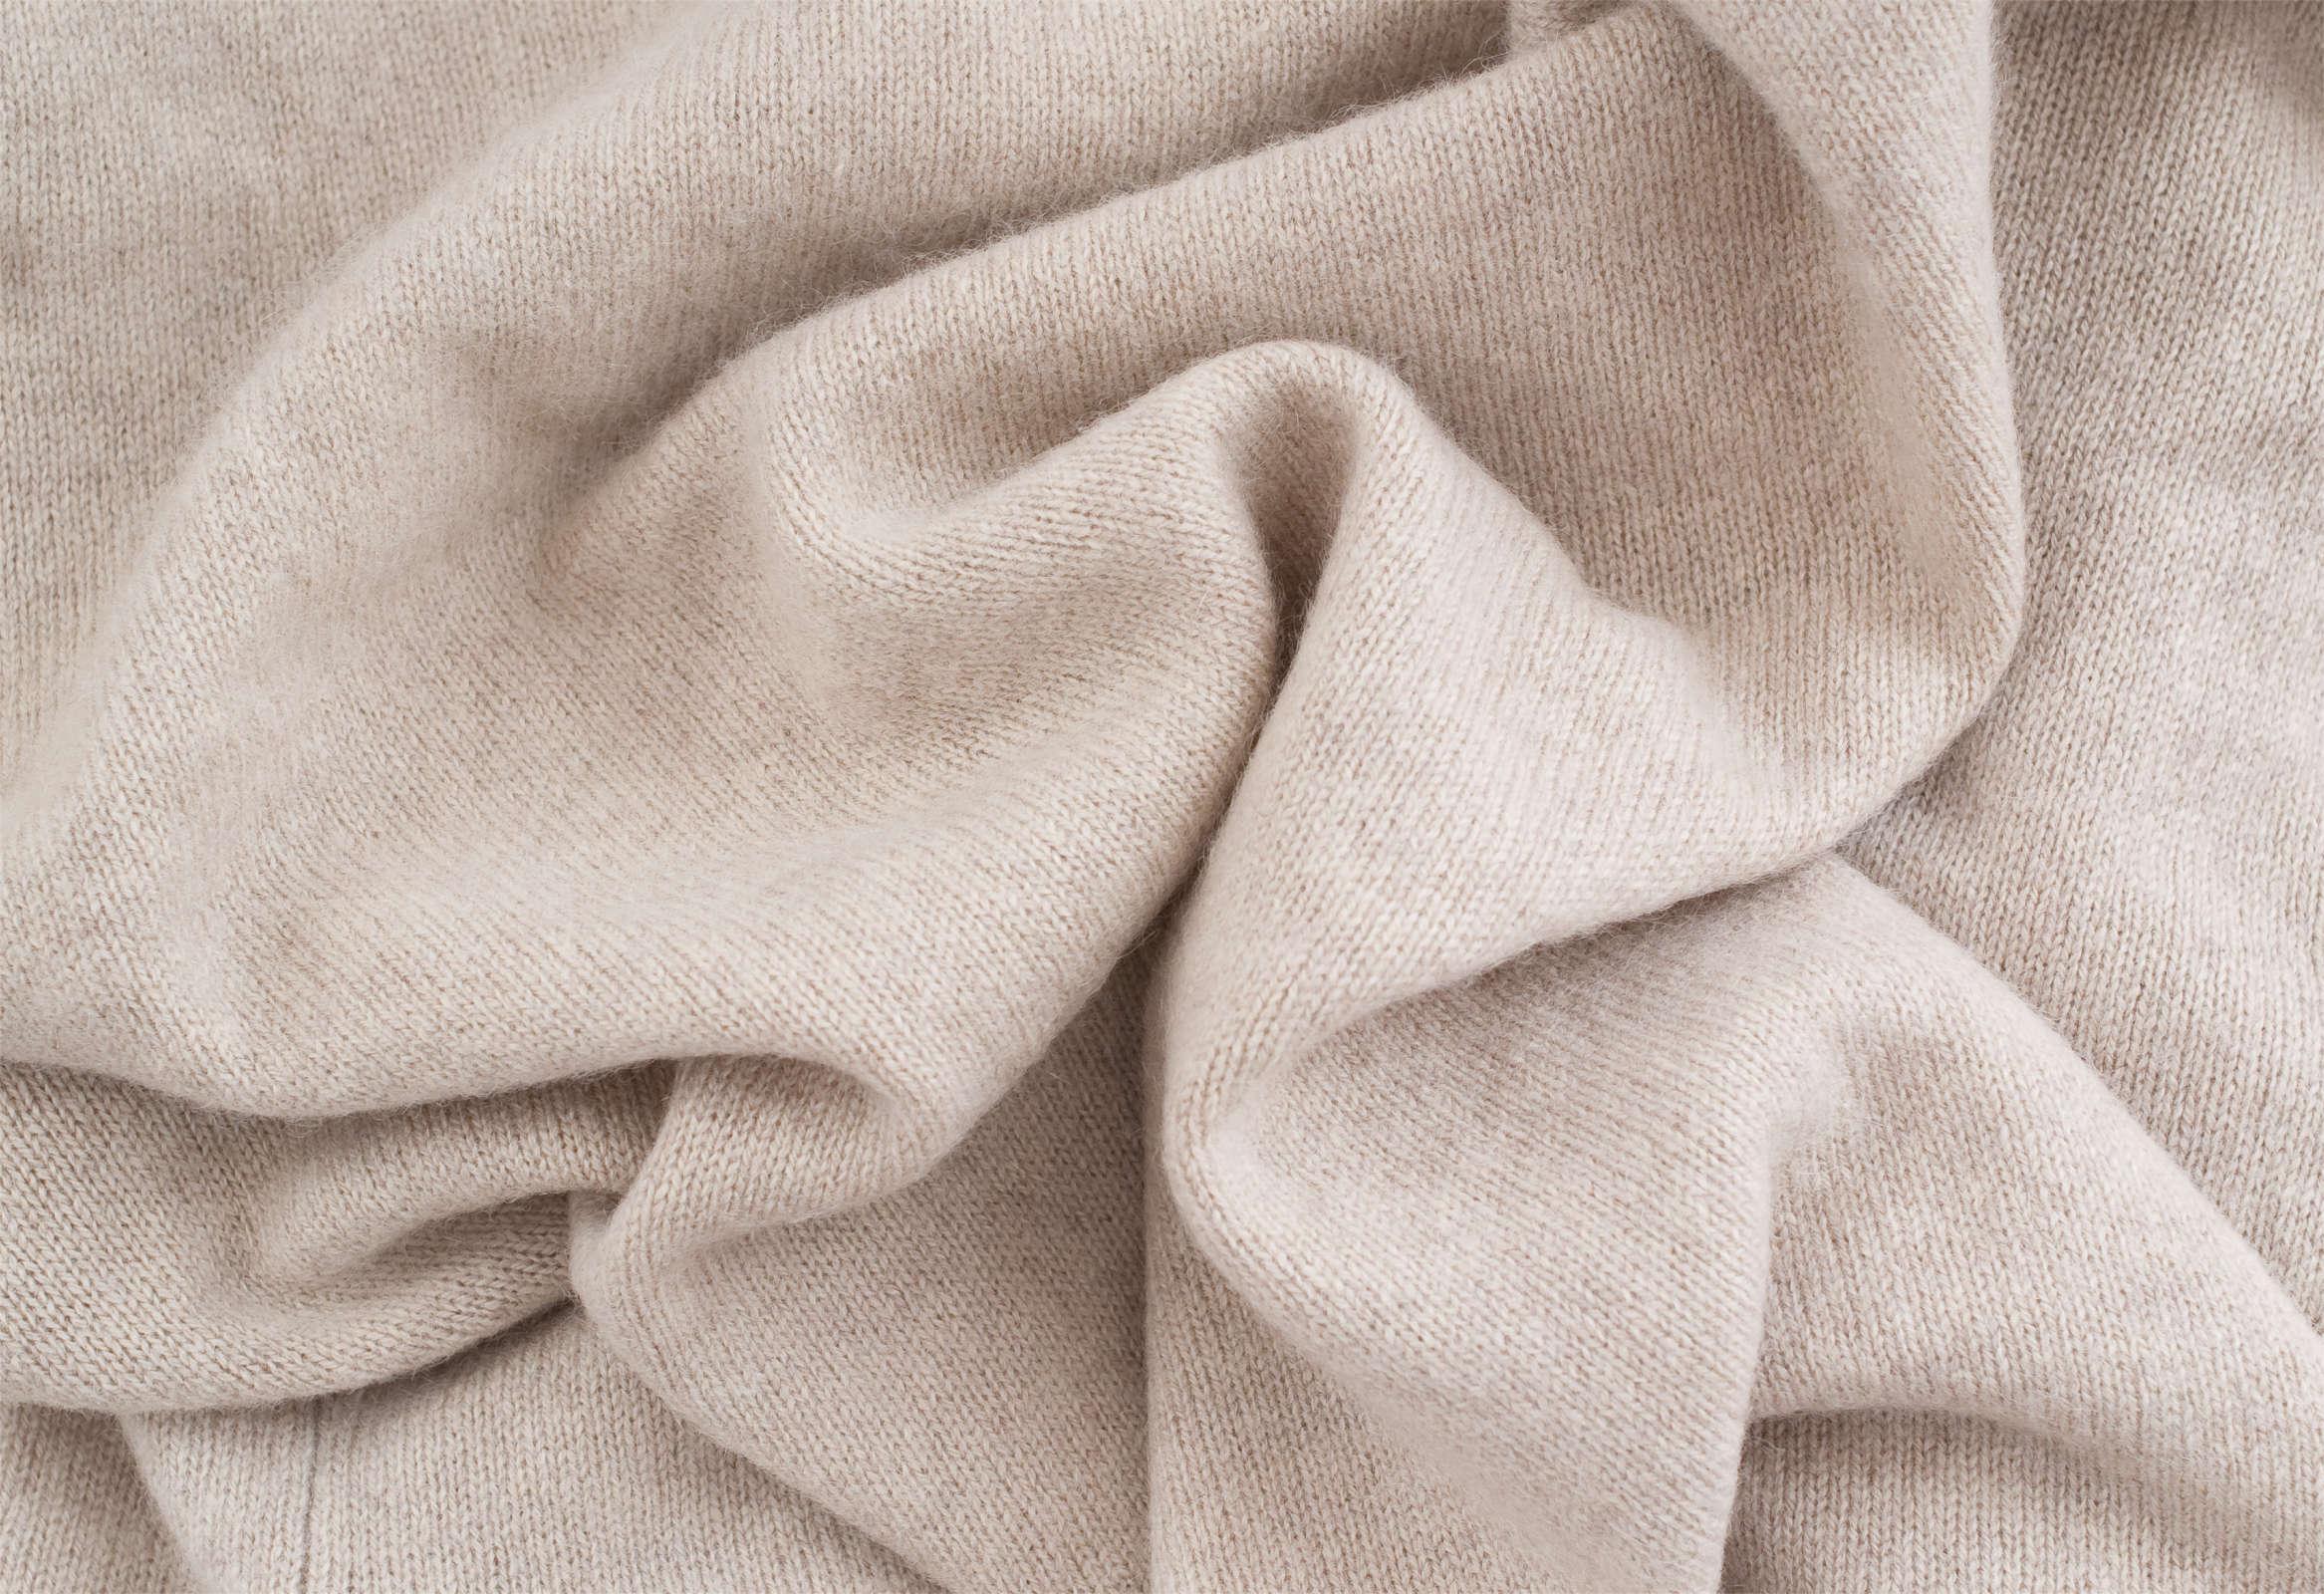 The Luxurious Comfort of Cashmere Sweaters